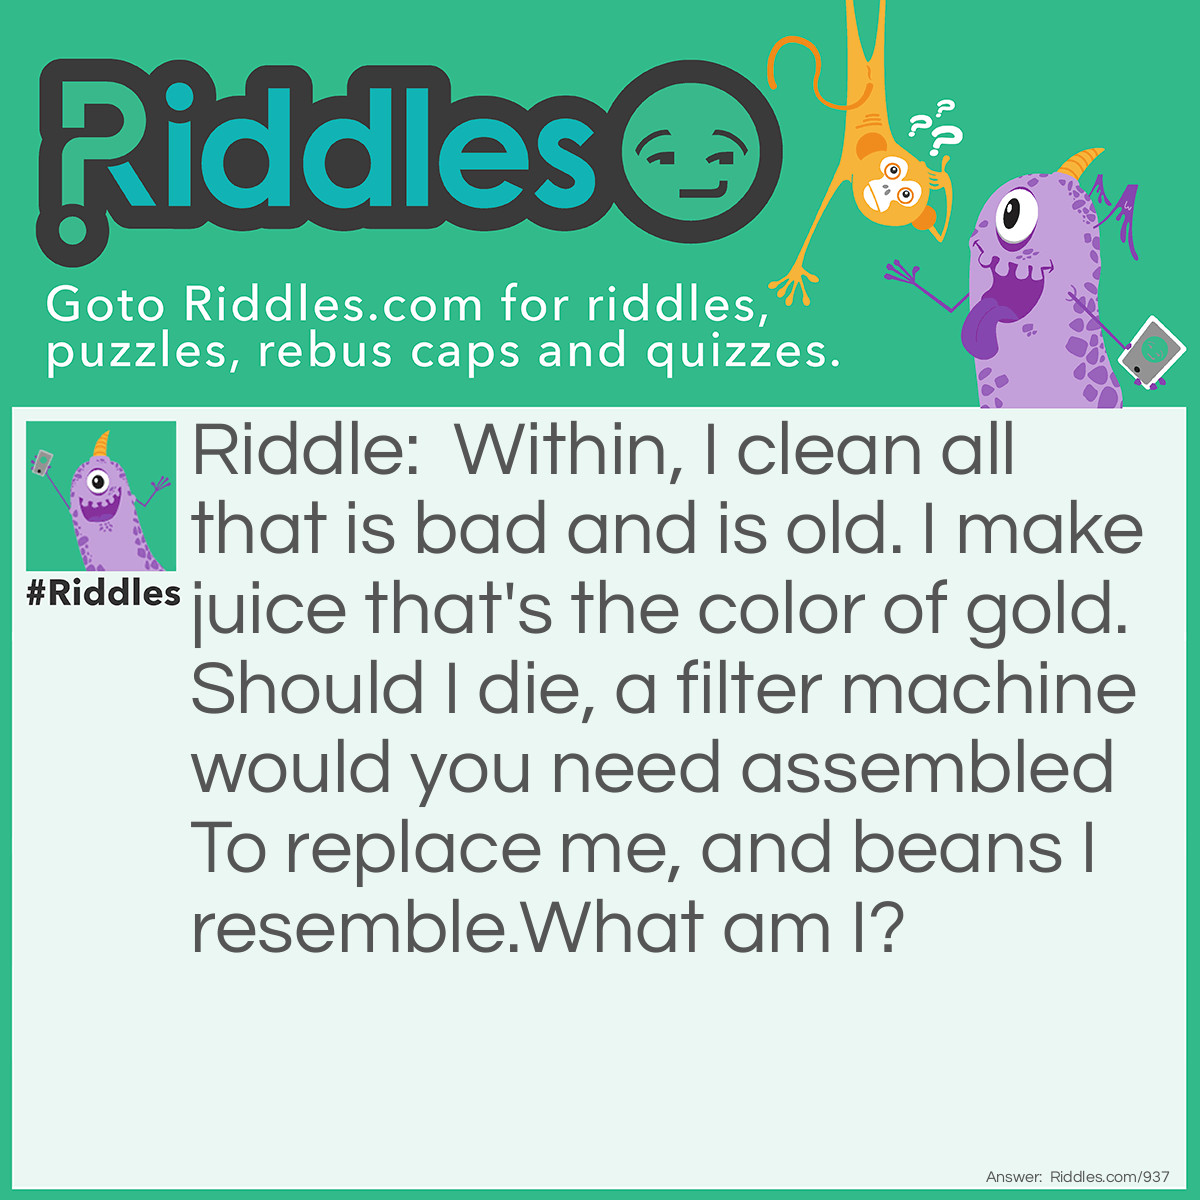 Riddle: Within, I clean all that is bad and is old. I make juice that's the color of gold. Should I die, a filter machine would you need assembled To replace me, and beans I resemble.
What am I? Answer: A kidney.